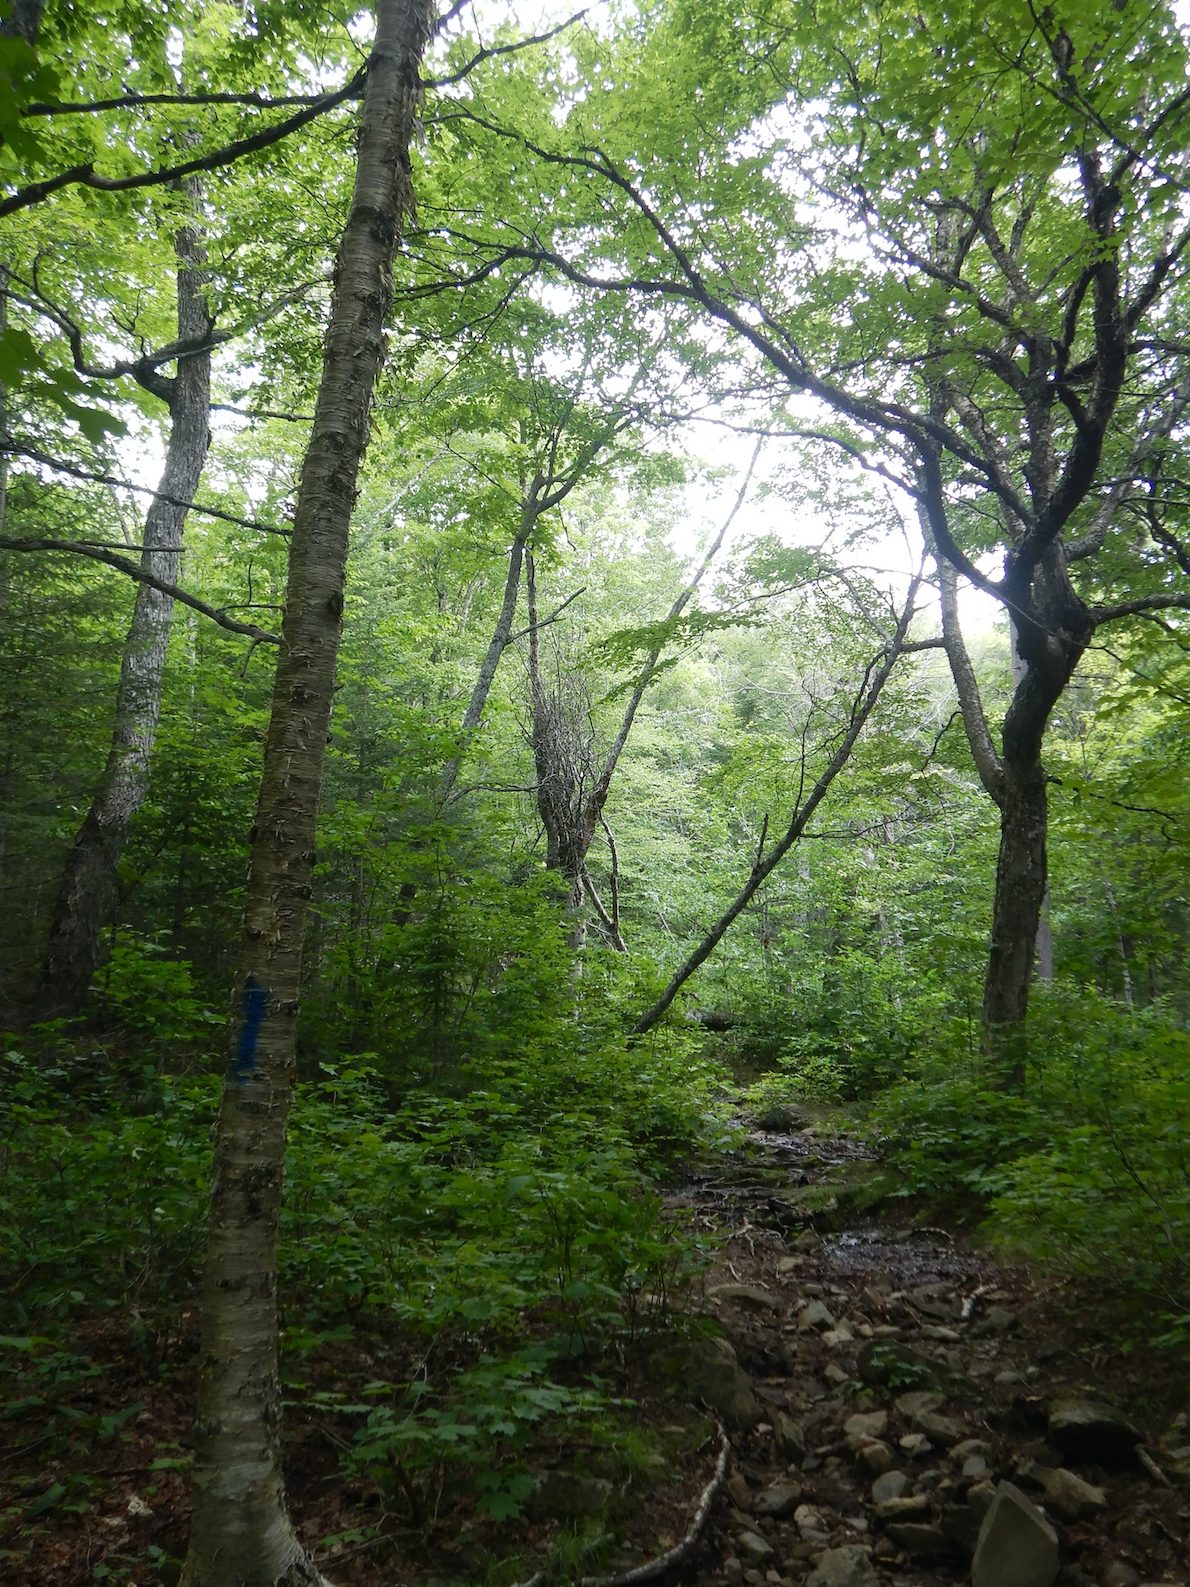 Portrait view of rocky trail through a green forest. The trail starts at lower right and disappears at center.Trees with bright green leaves obscure the sky. The understory is also thick with green plants.